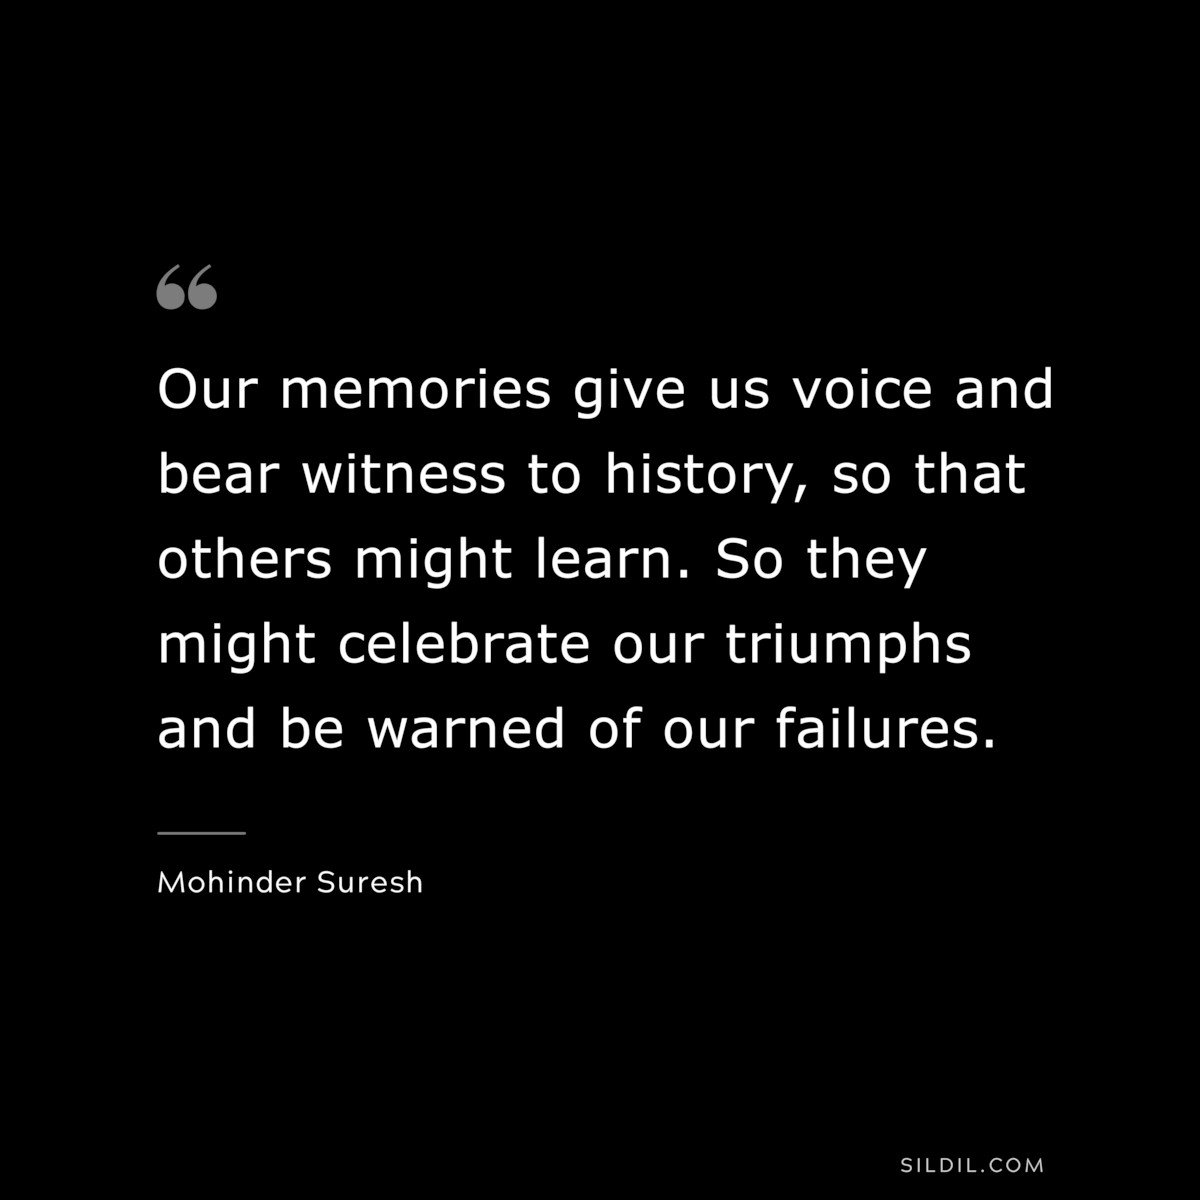 Our memories give us voice and bear witness to history, so that others might learn. So they might celebrate our triumphs and be warned of our failures. ― Mohinder Suresh